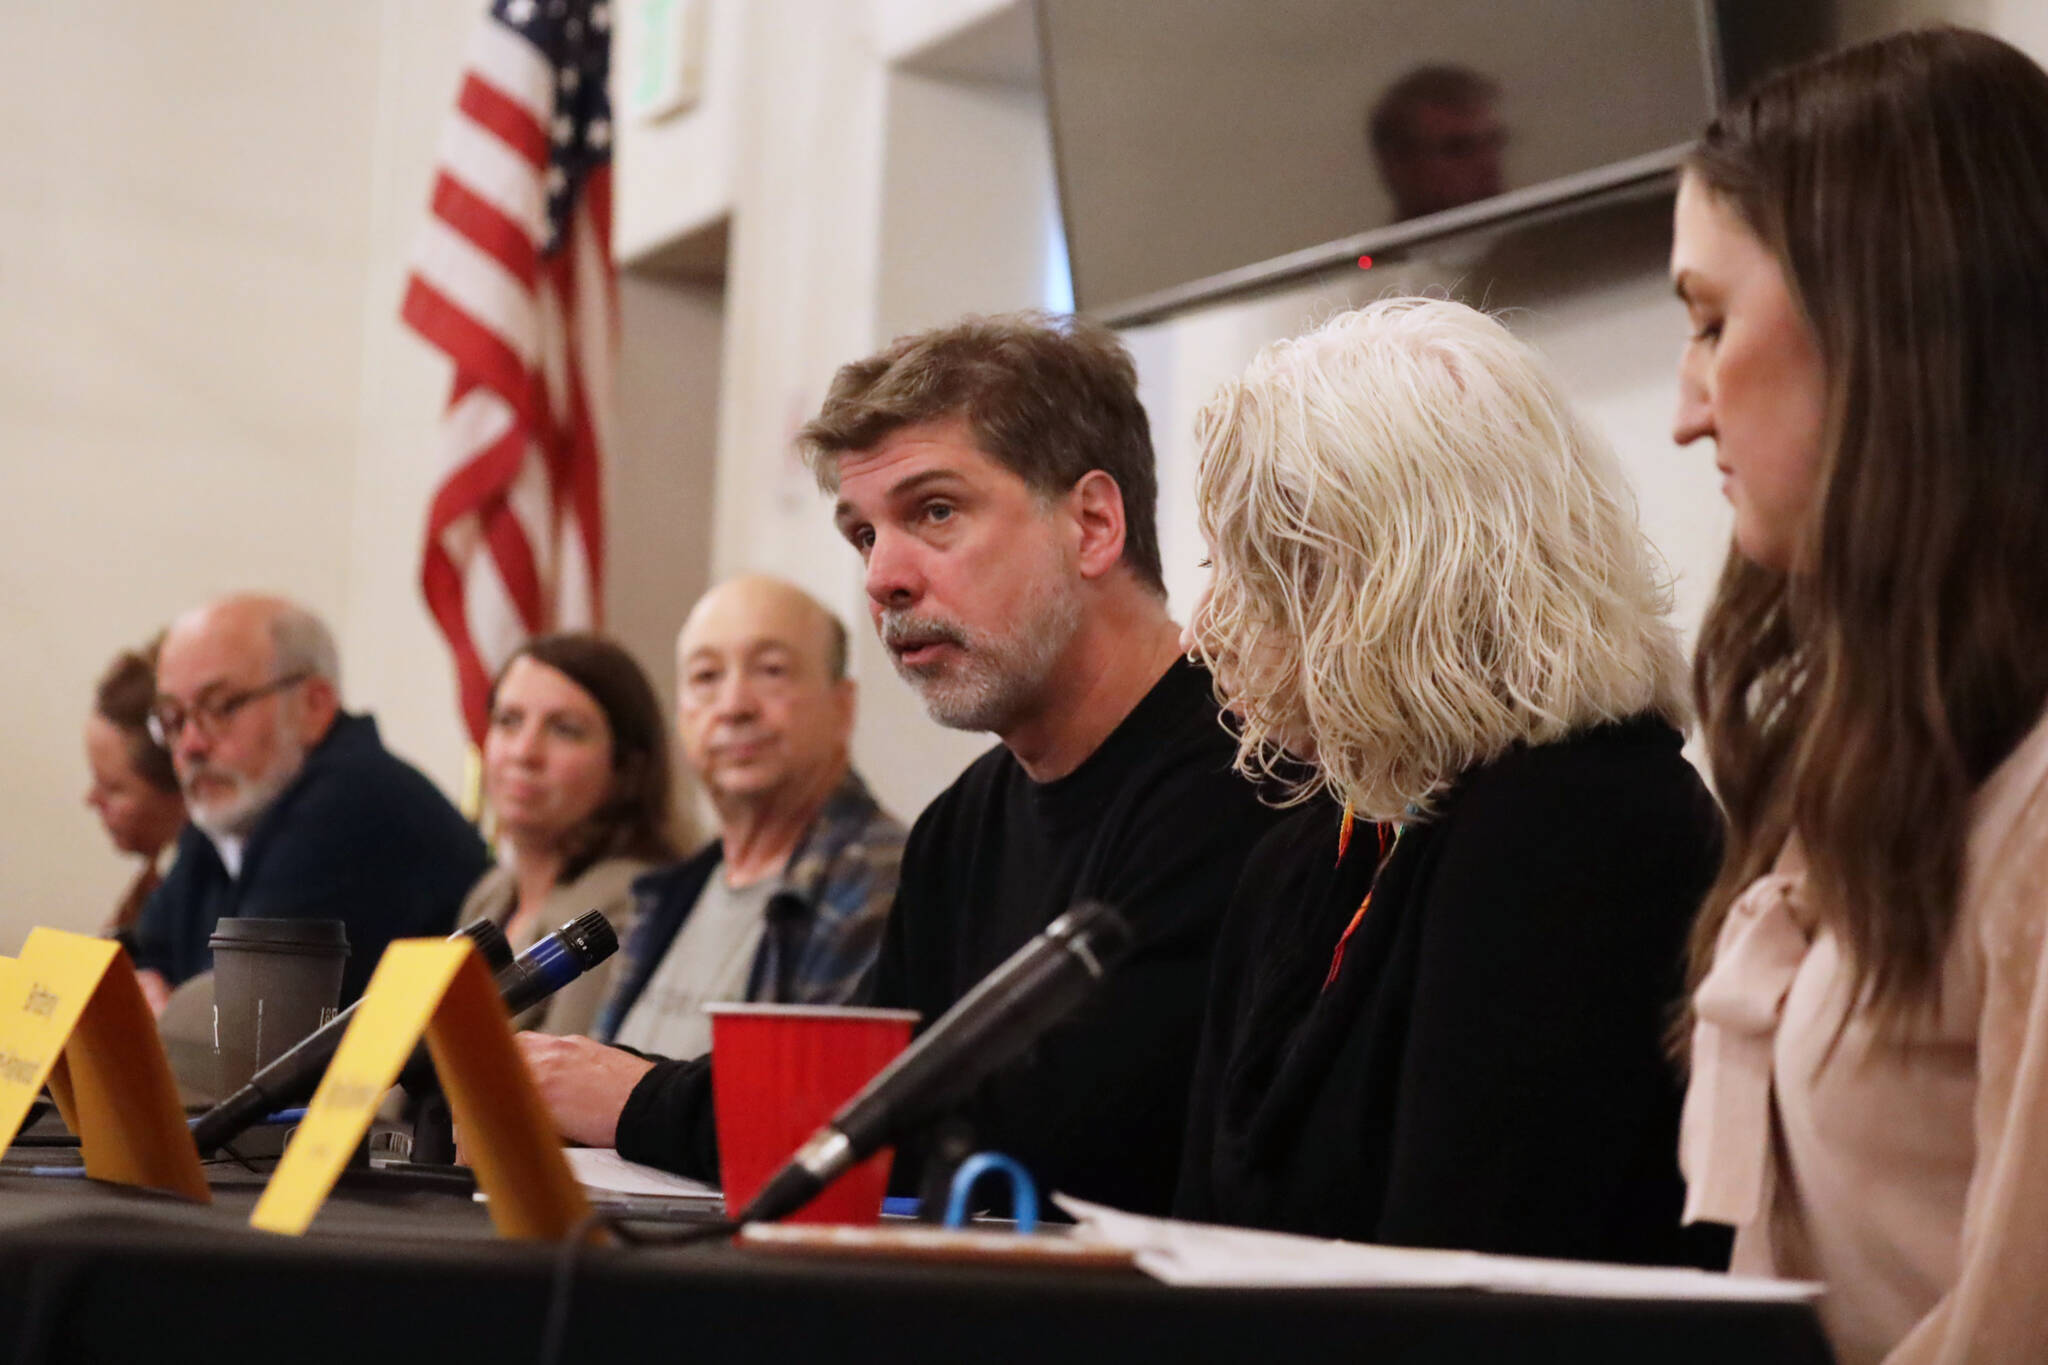 Juneau Board of Education candidate David Noon, center, answers a question during an election forum hosted by the Greater Juneau Chamber of Commerce on Thursday afternoon. (Clarise Larson / Juneau Empire)